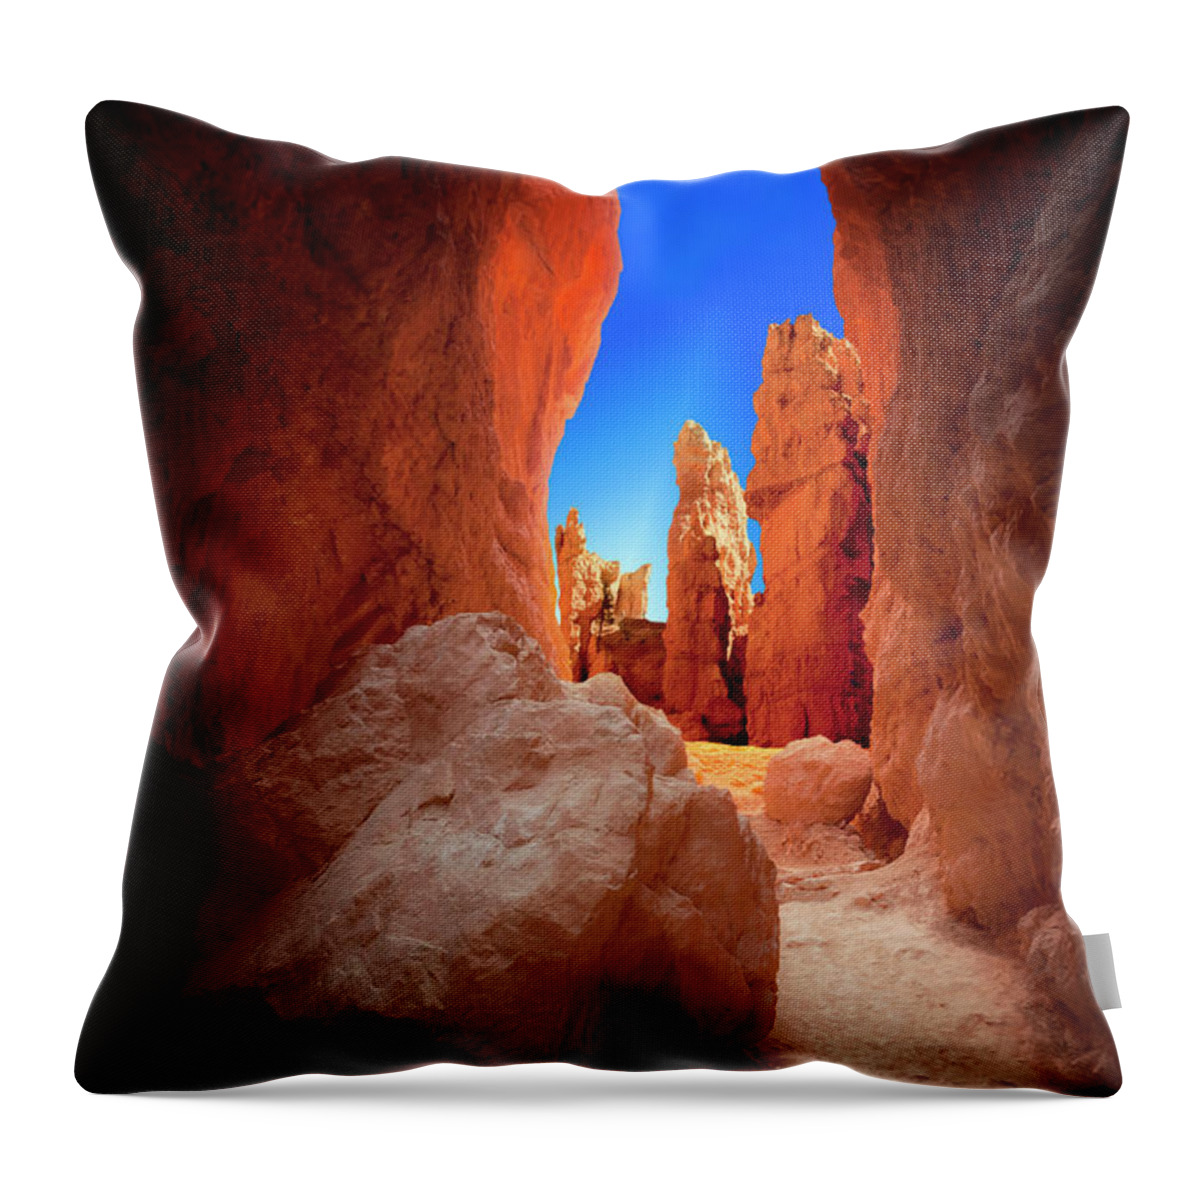 Bryce Canyon National Park Throw Pillow featuring the photograph Bryce Canyon Narrows by Gary Warnimont